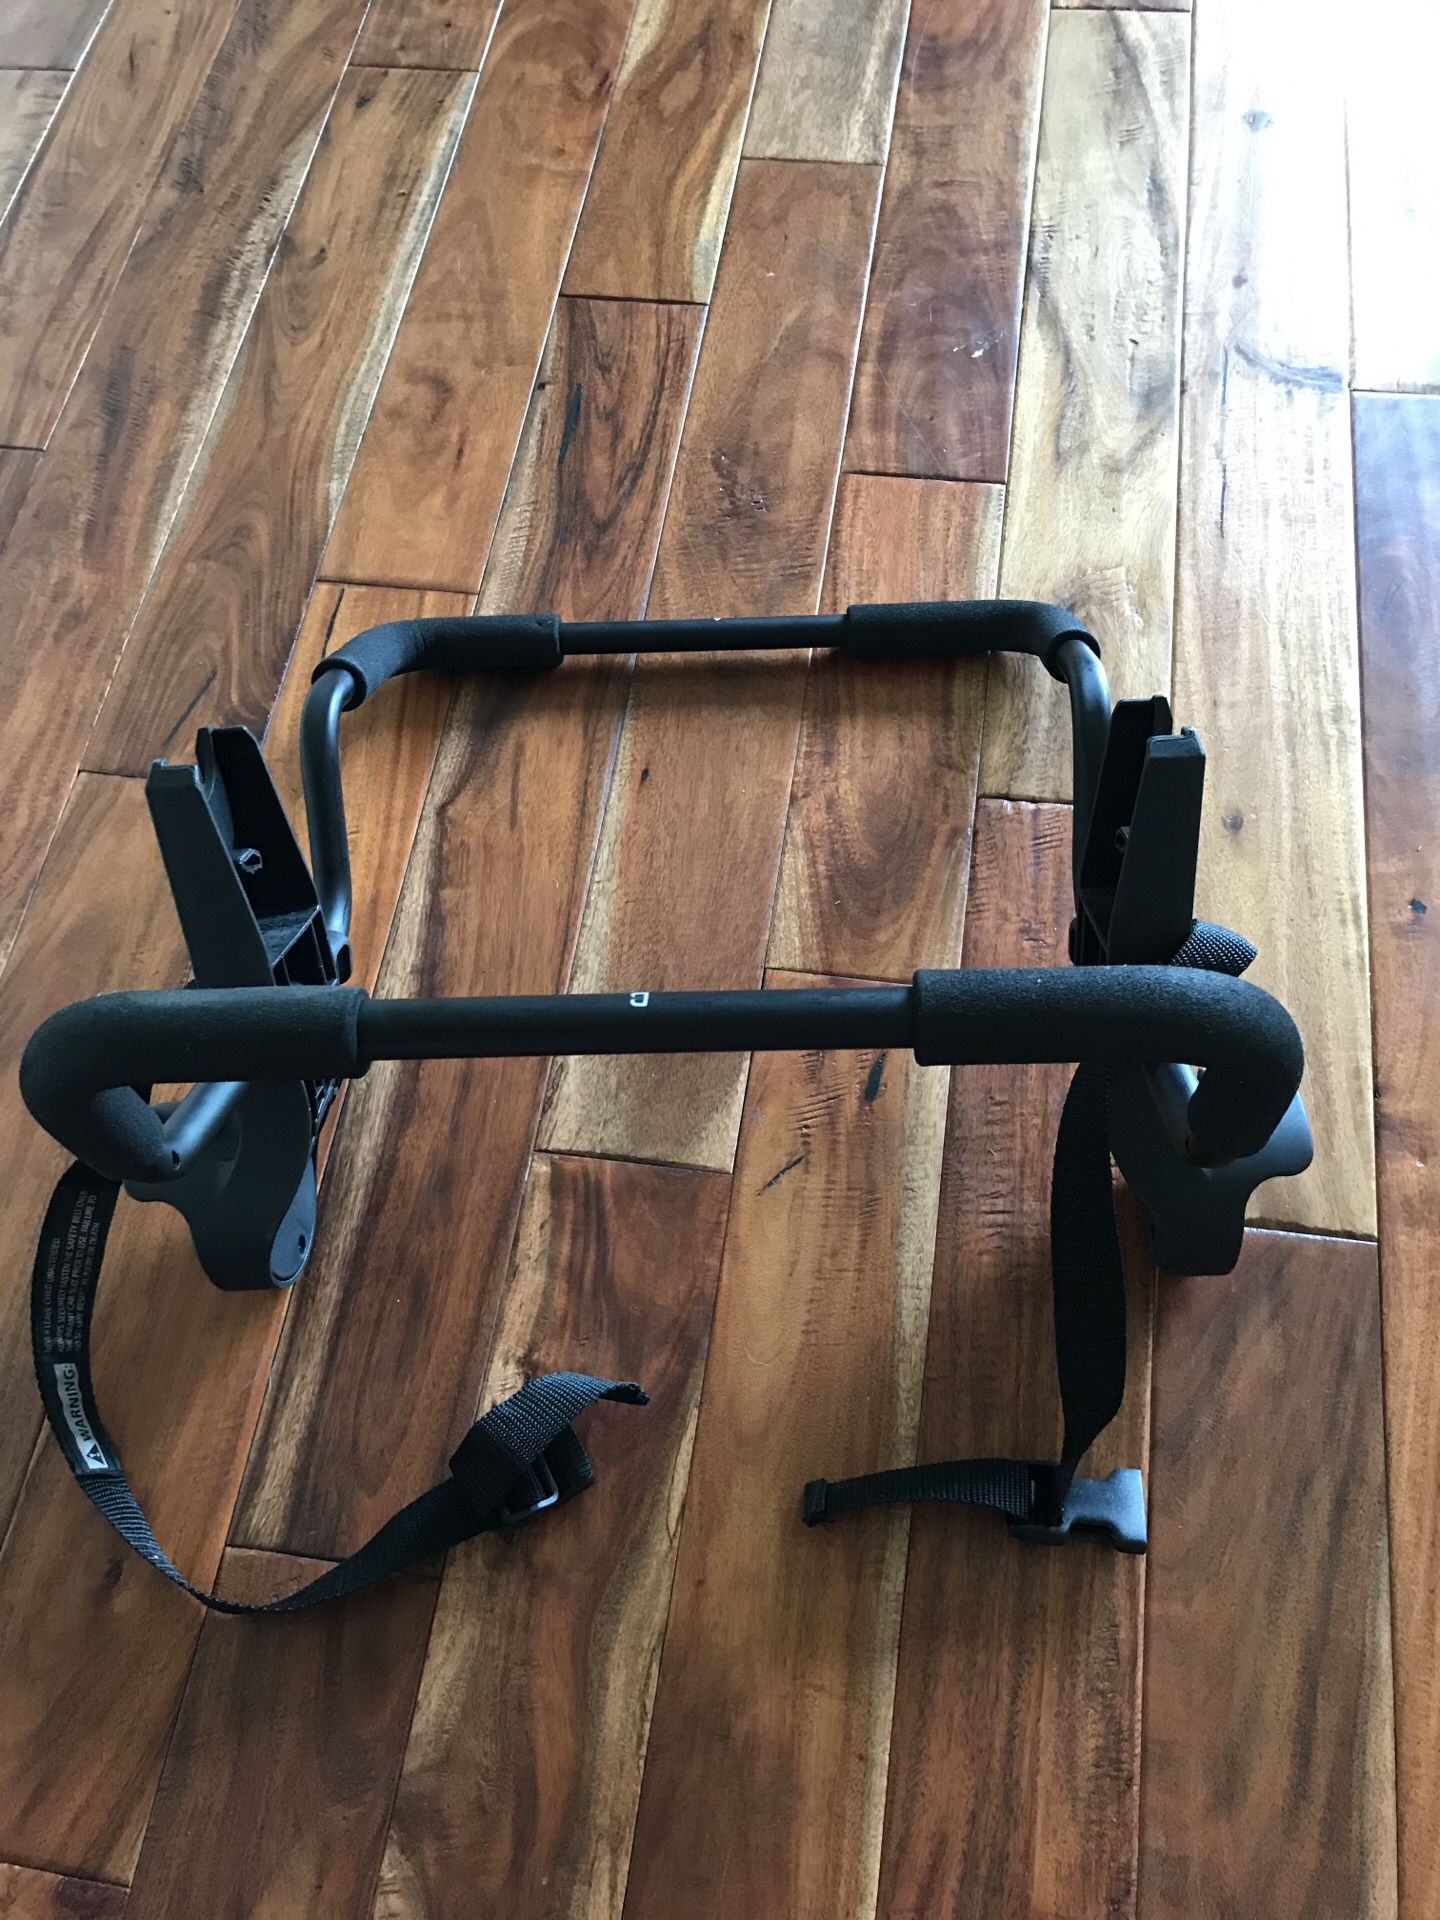 Chicco Keyfit car seat adapter to a City Select stroller